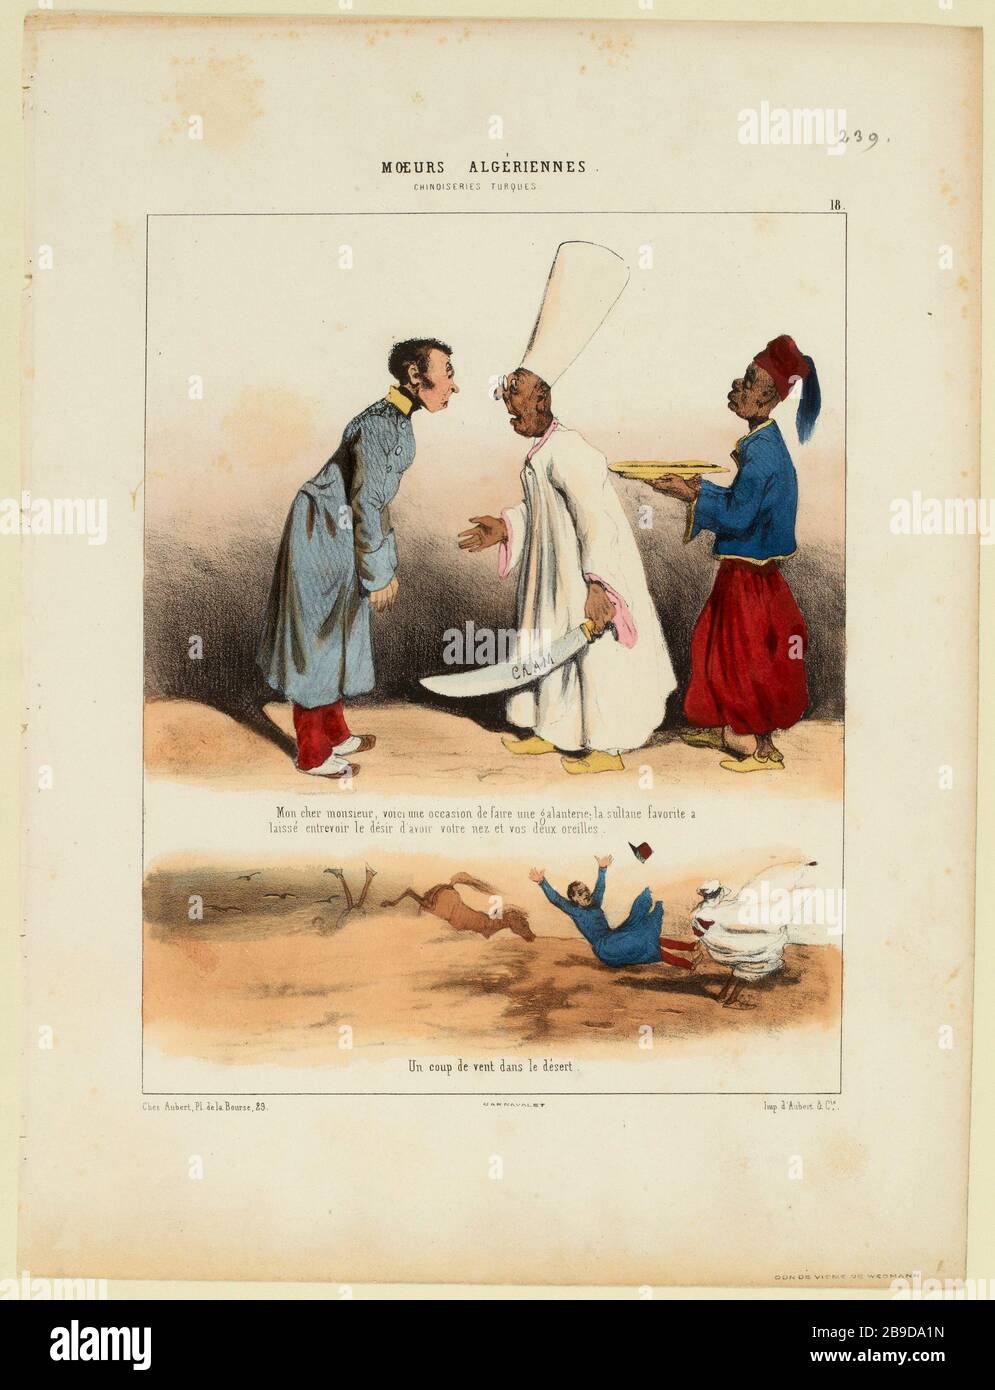 My dear sir, here's a chance to make a gallantry; the favorite Sultana has / hinted at the desire to have your nose and ears. [...] / No. 18 (registered title) |. Algerian Habits. (MFR 19) (under all) Stock Photo